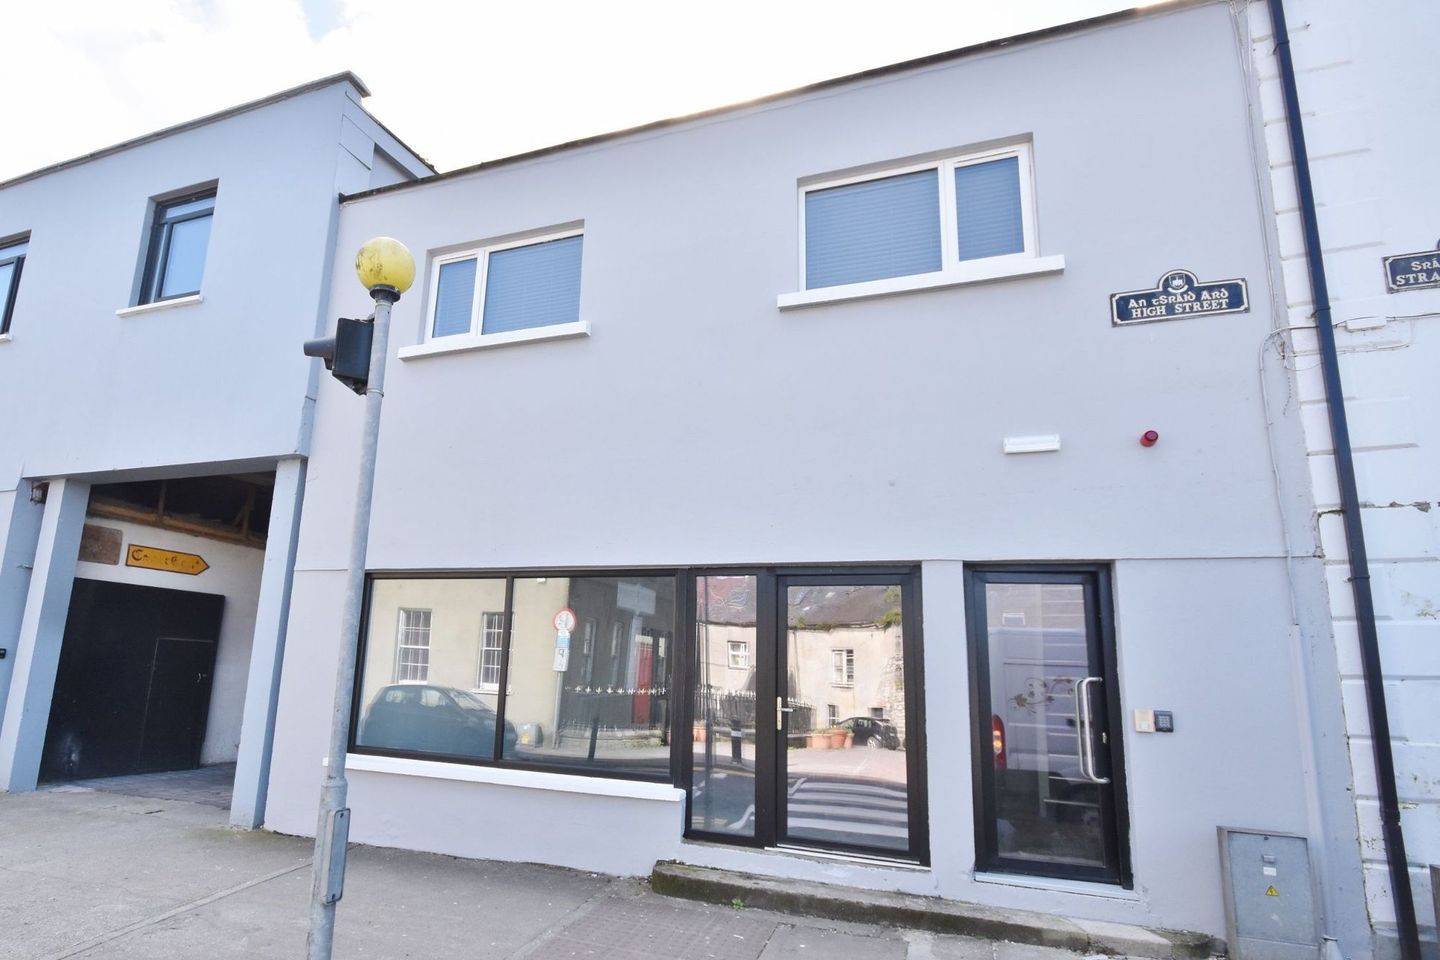 12 High St, Tralee, Co. Kerry